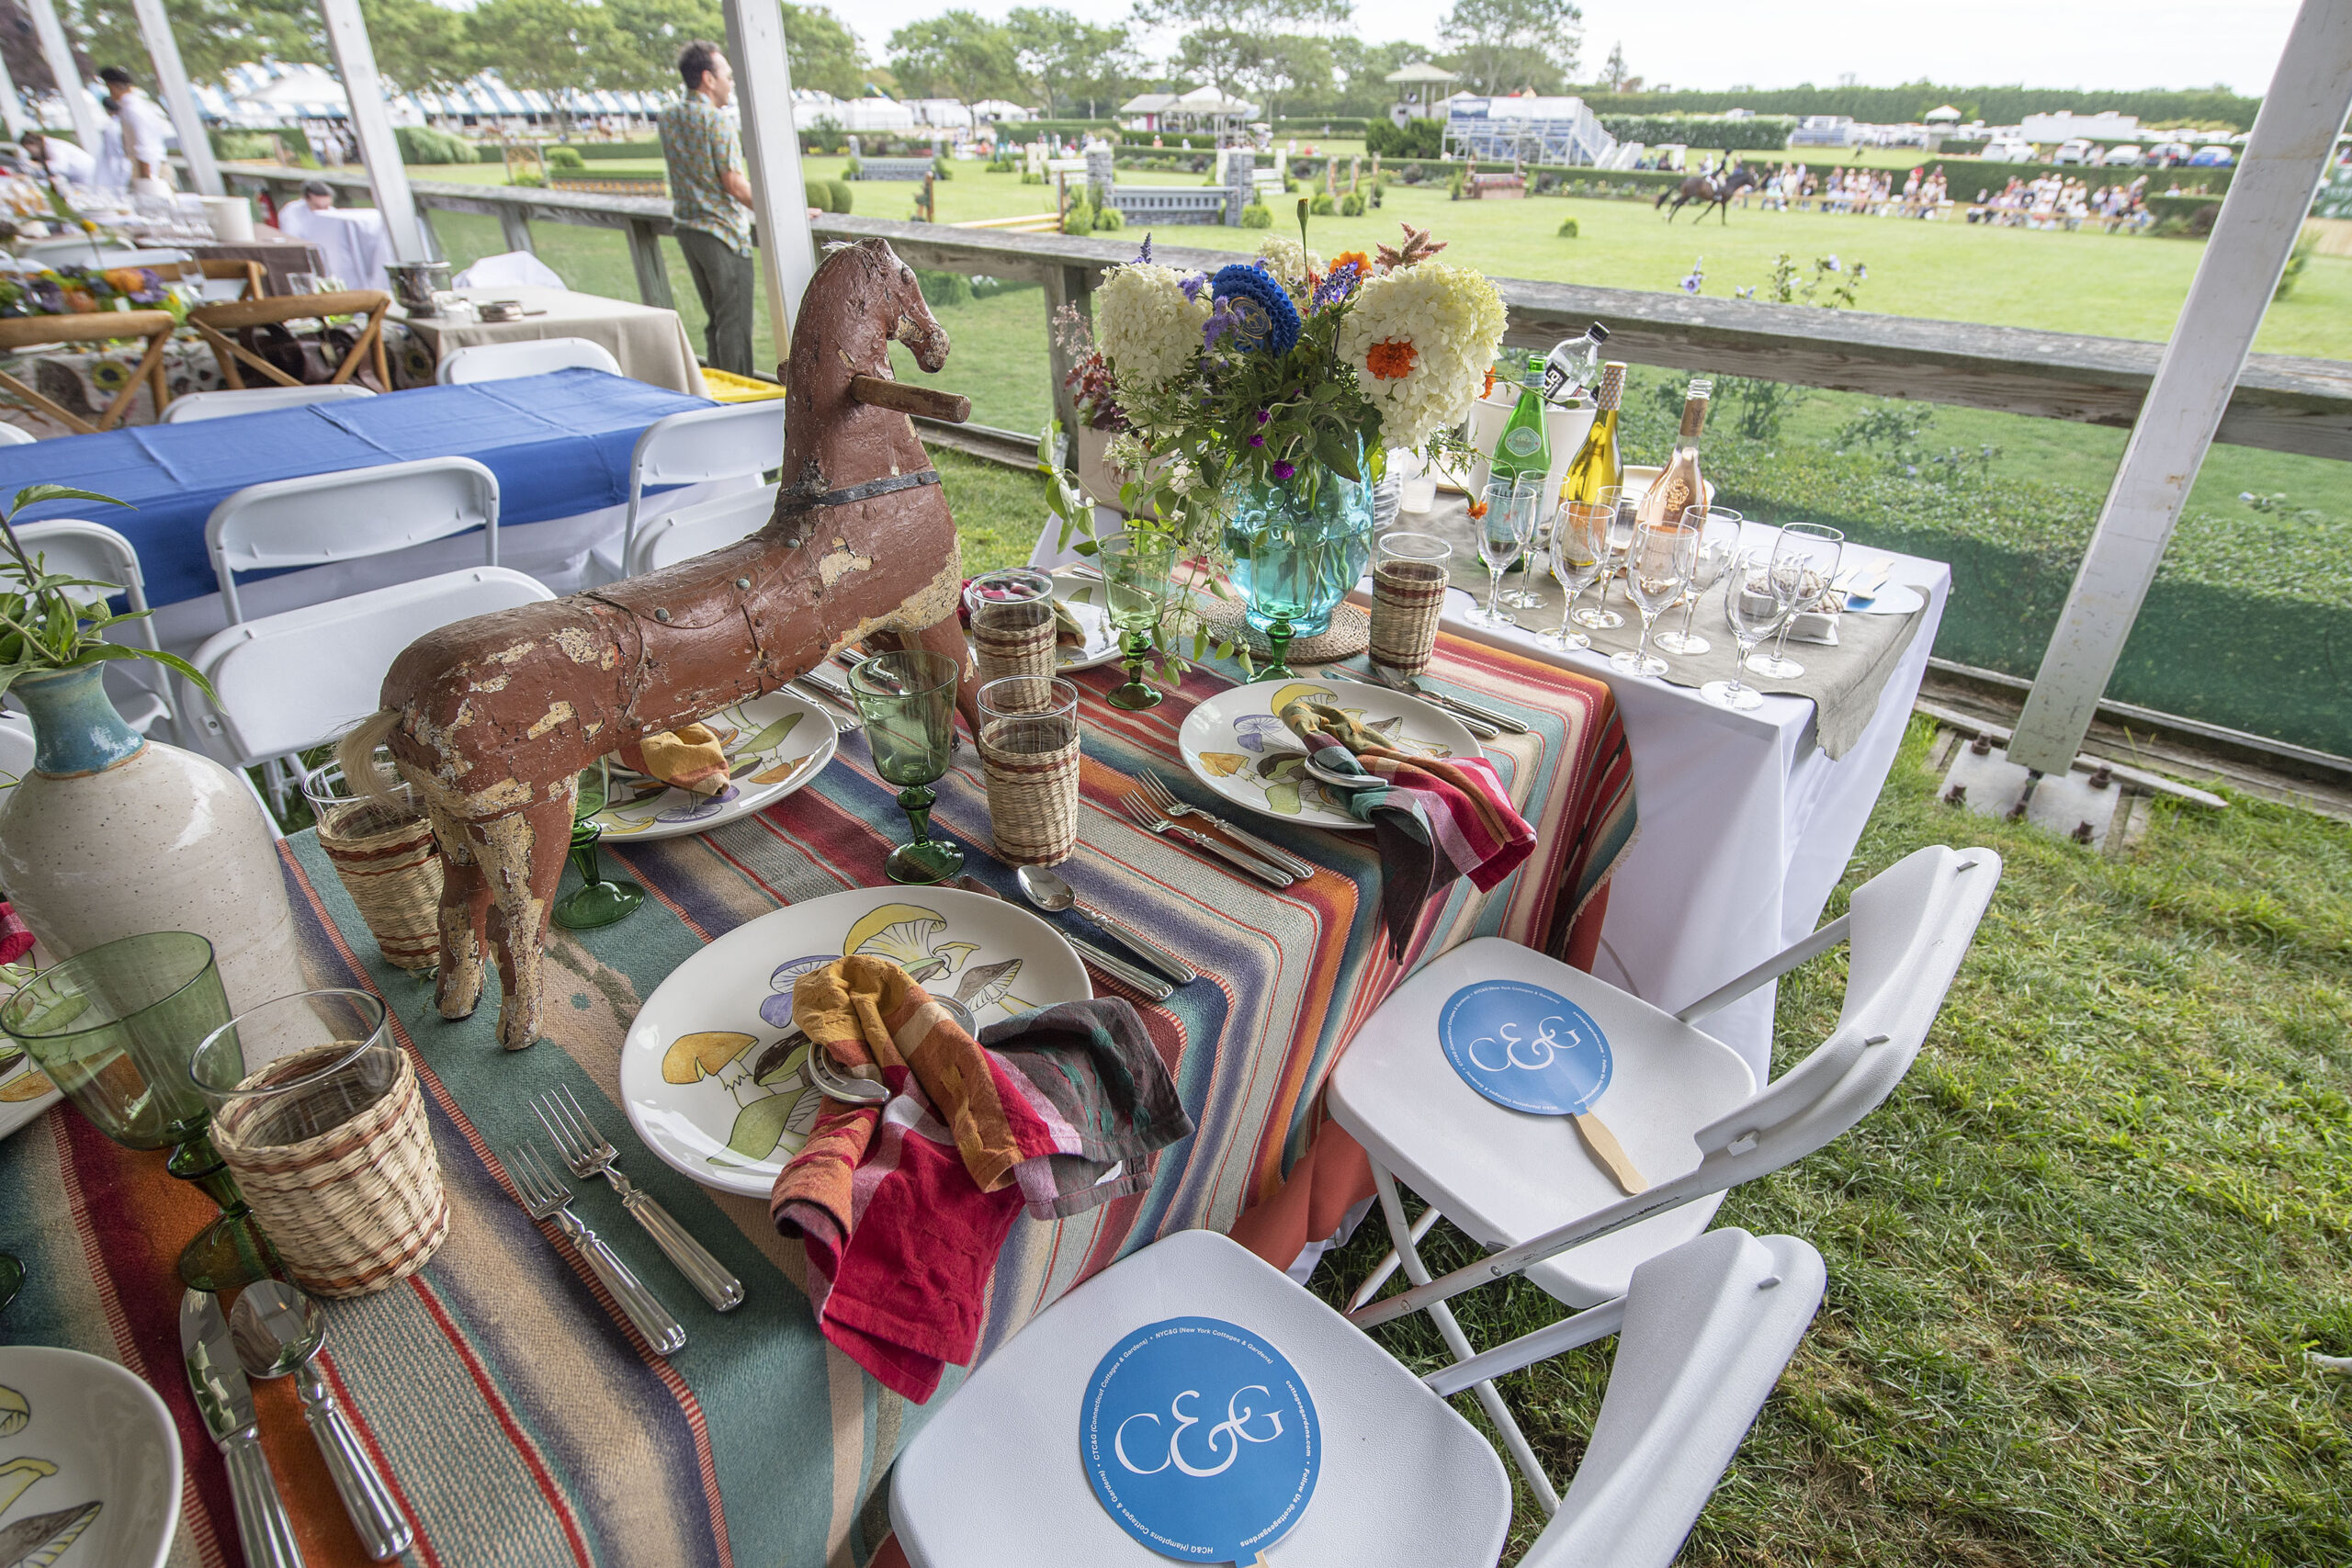 The table setting for HC&G Magazine in the VIP tent at the 2021 Hampton Classic on Grand Prix Sunday, September 5th, 2021